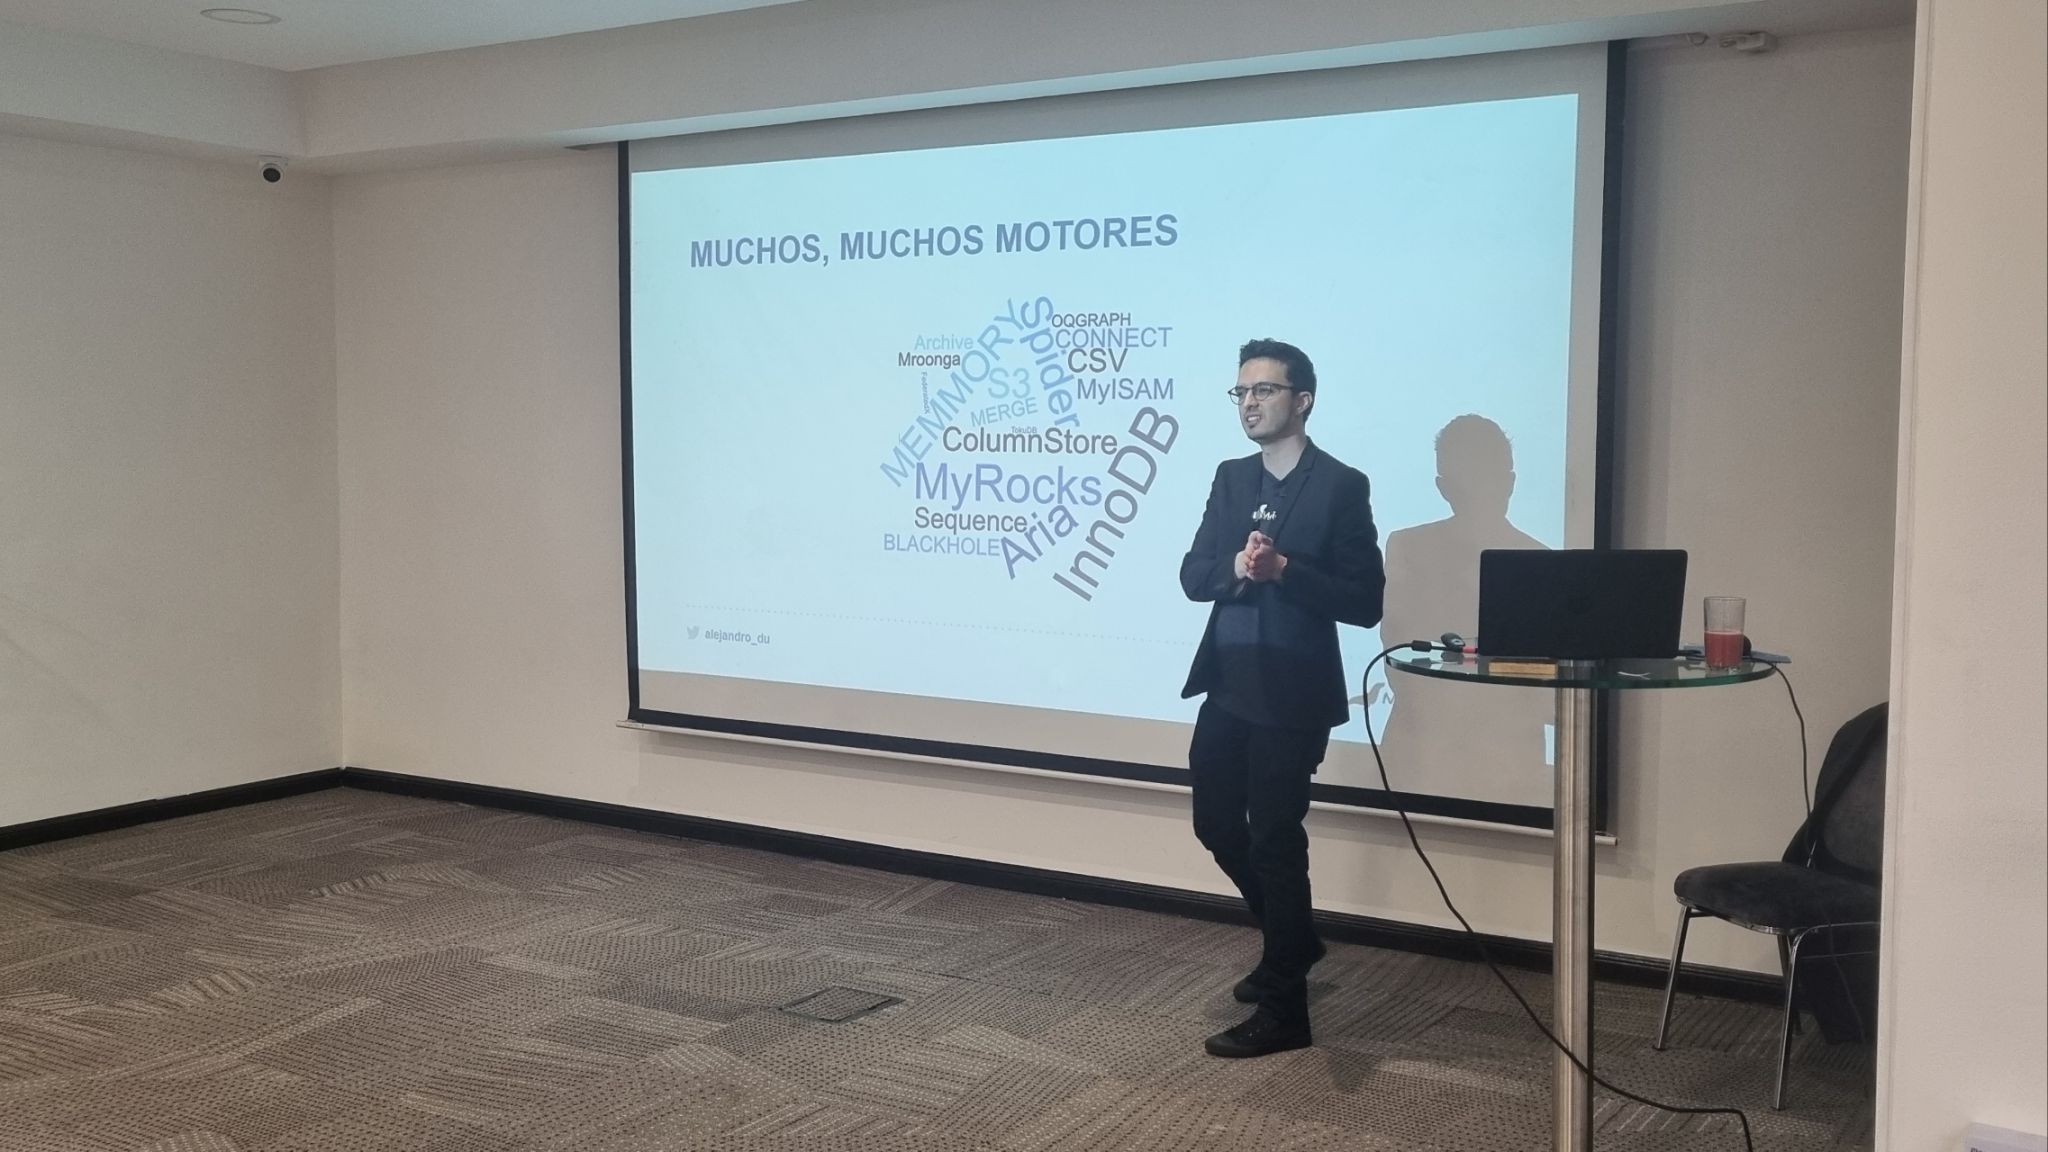 Alejandro Duarte speaking about the MariaDB storage engines during an open-souce conference in Bogotá, Colombia